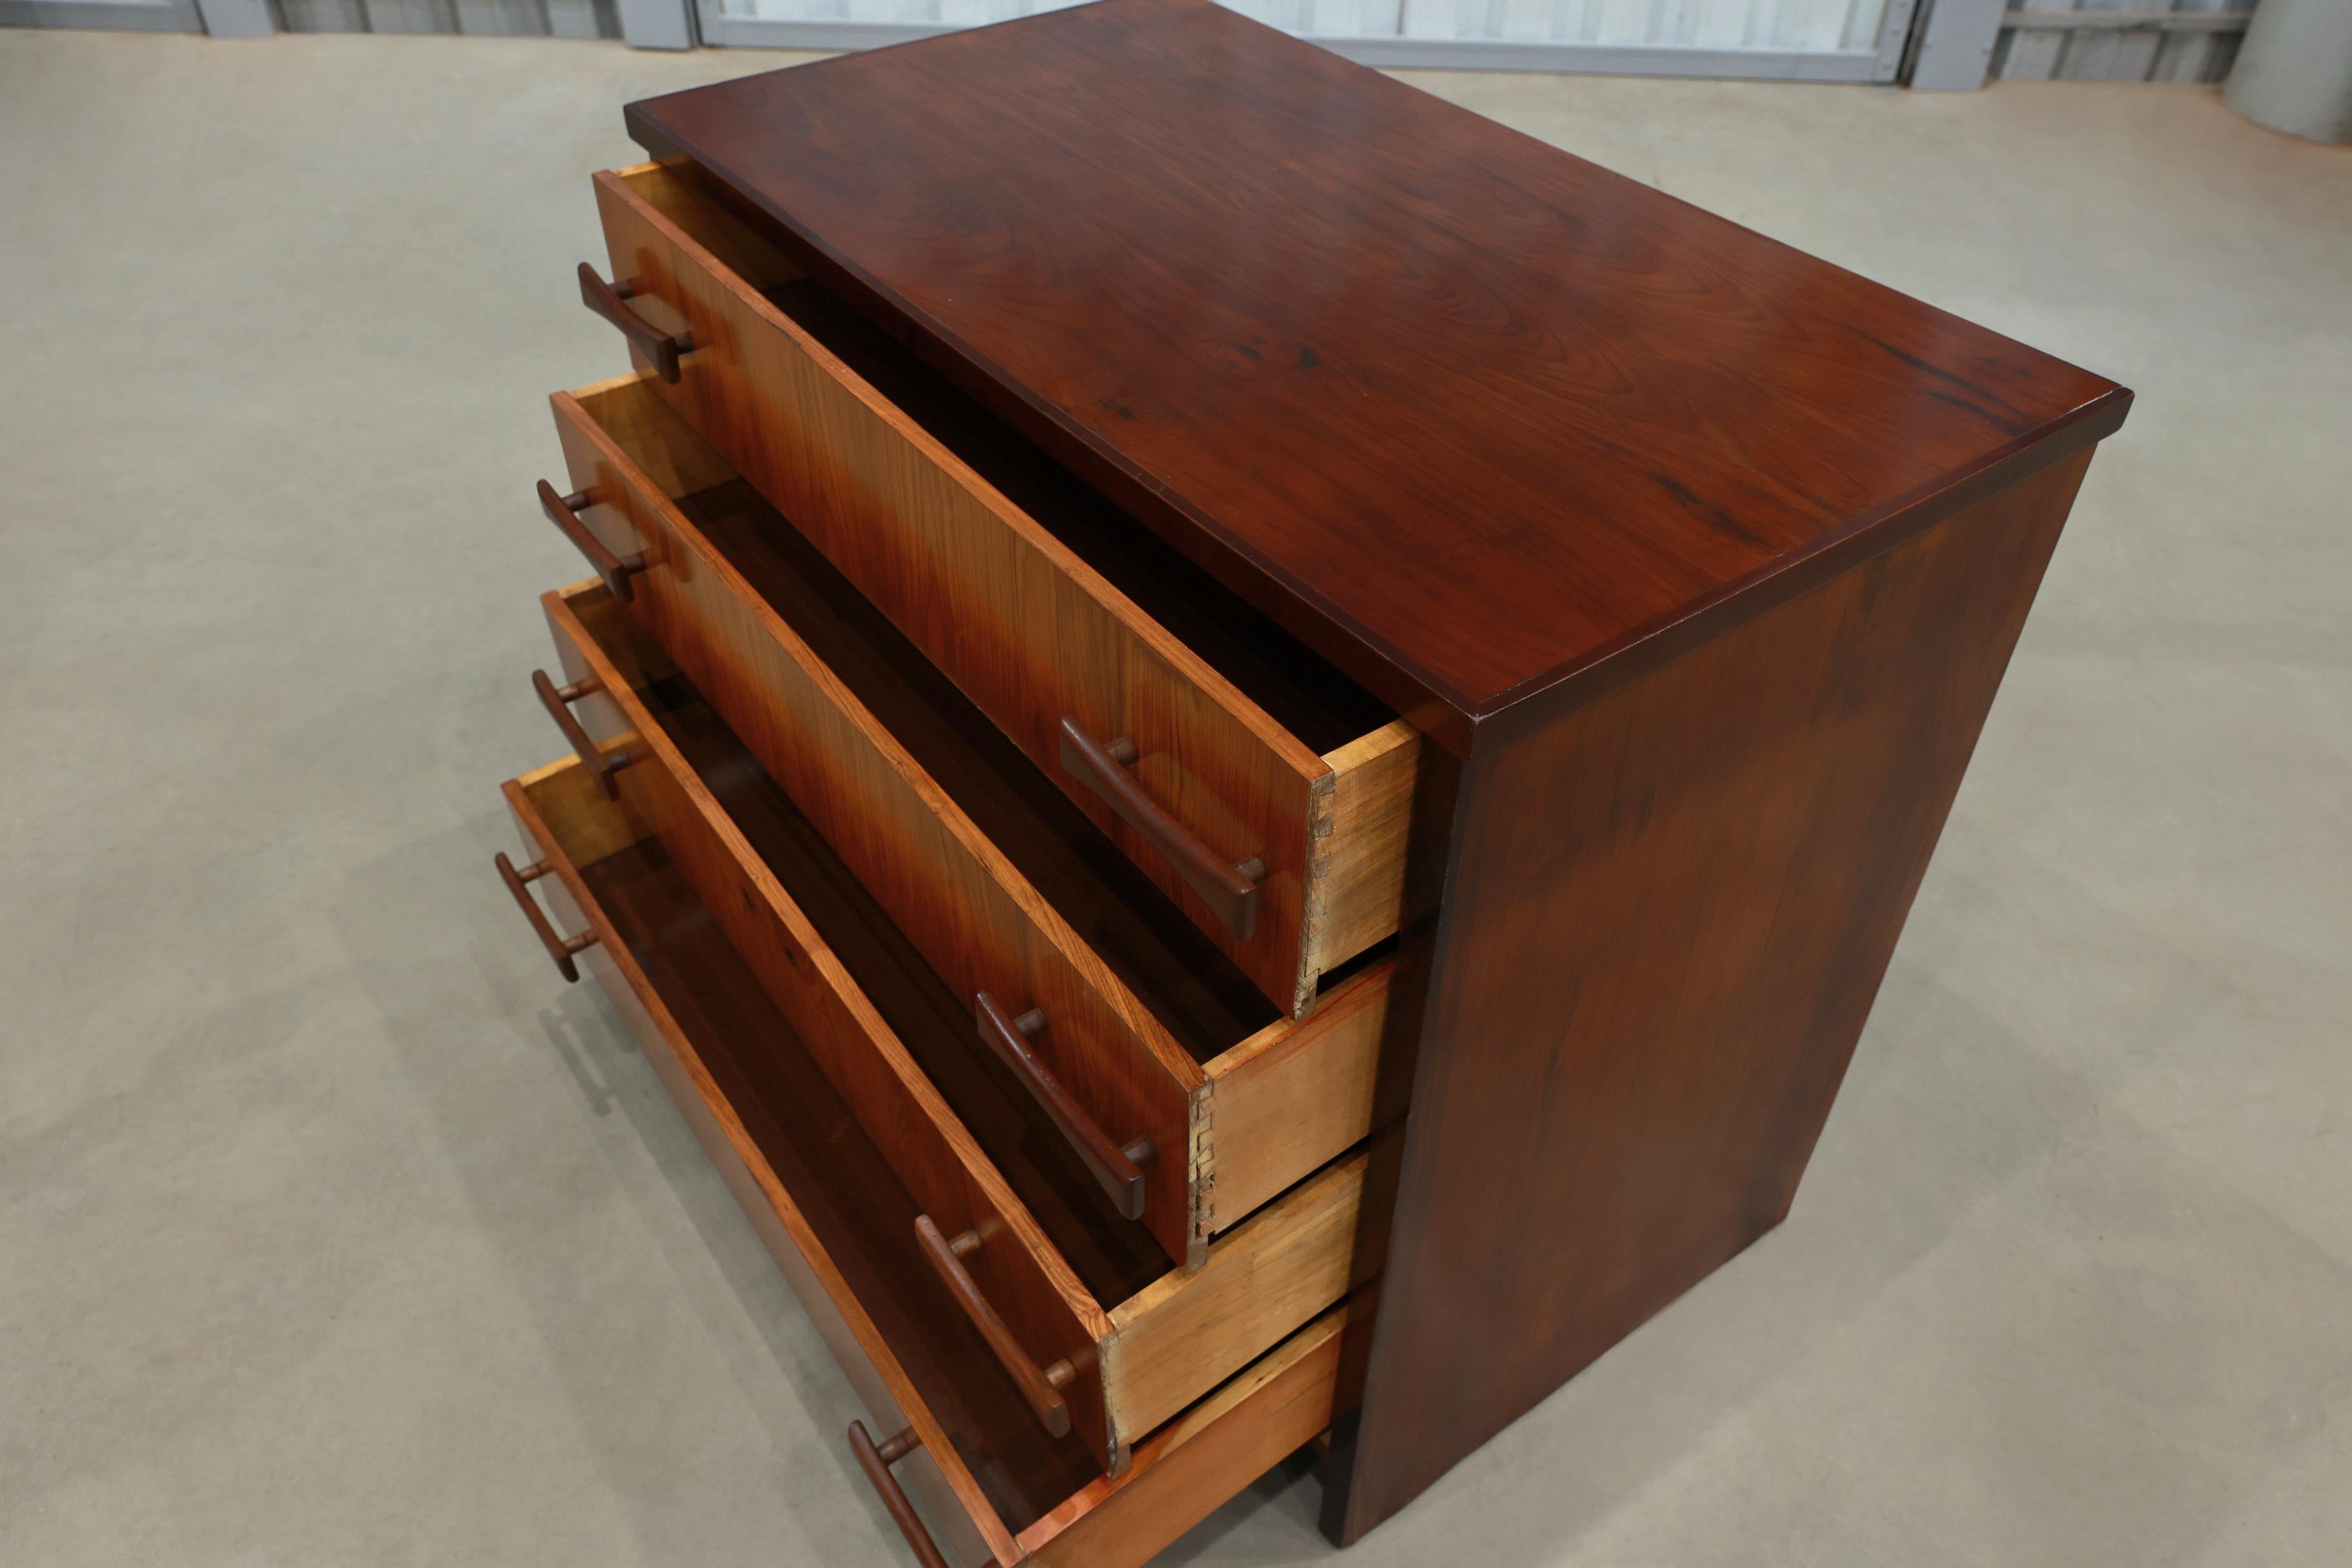 Hardwood Mid-Century Modern Chest of Drawers in Caviuna wood, Unknown, c. 1950 For Sale